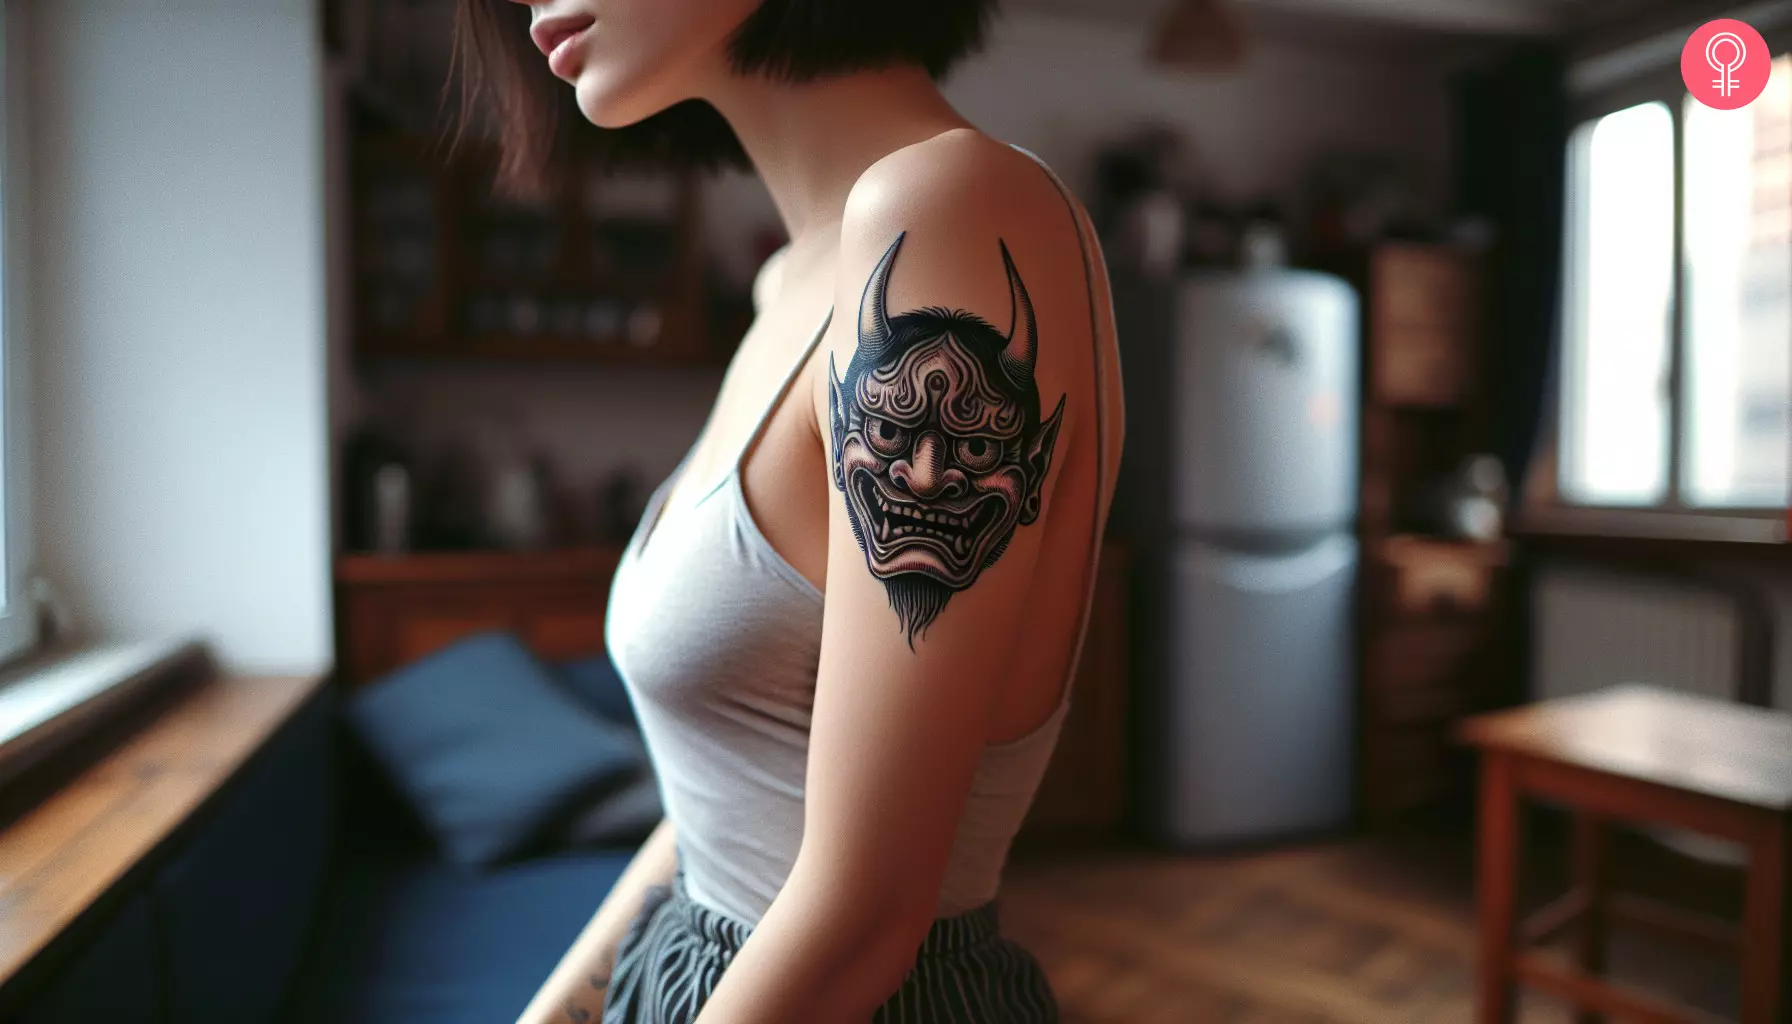 A Japanese devil mask tattoo on the upper arm